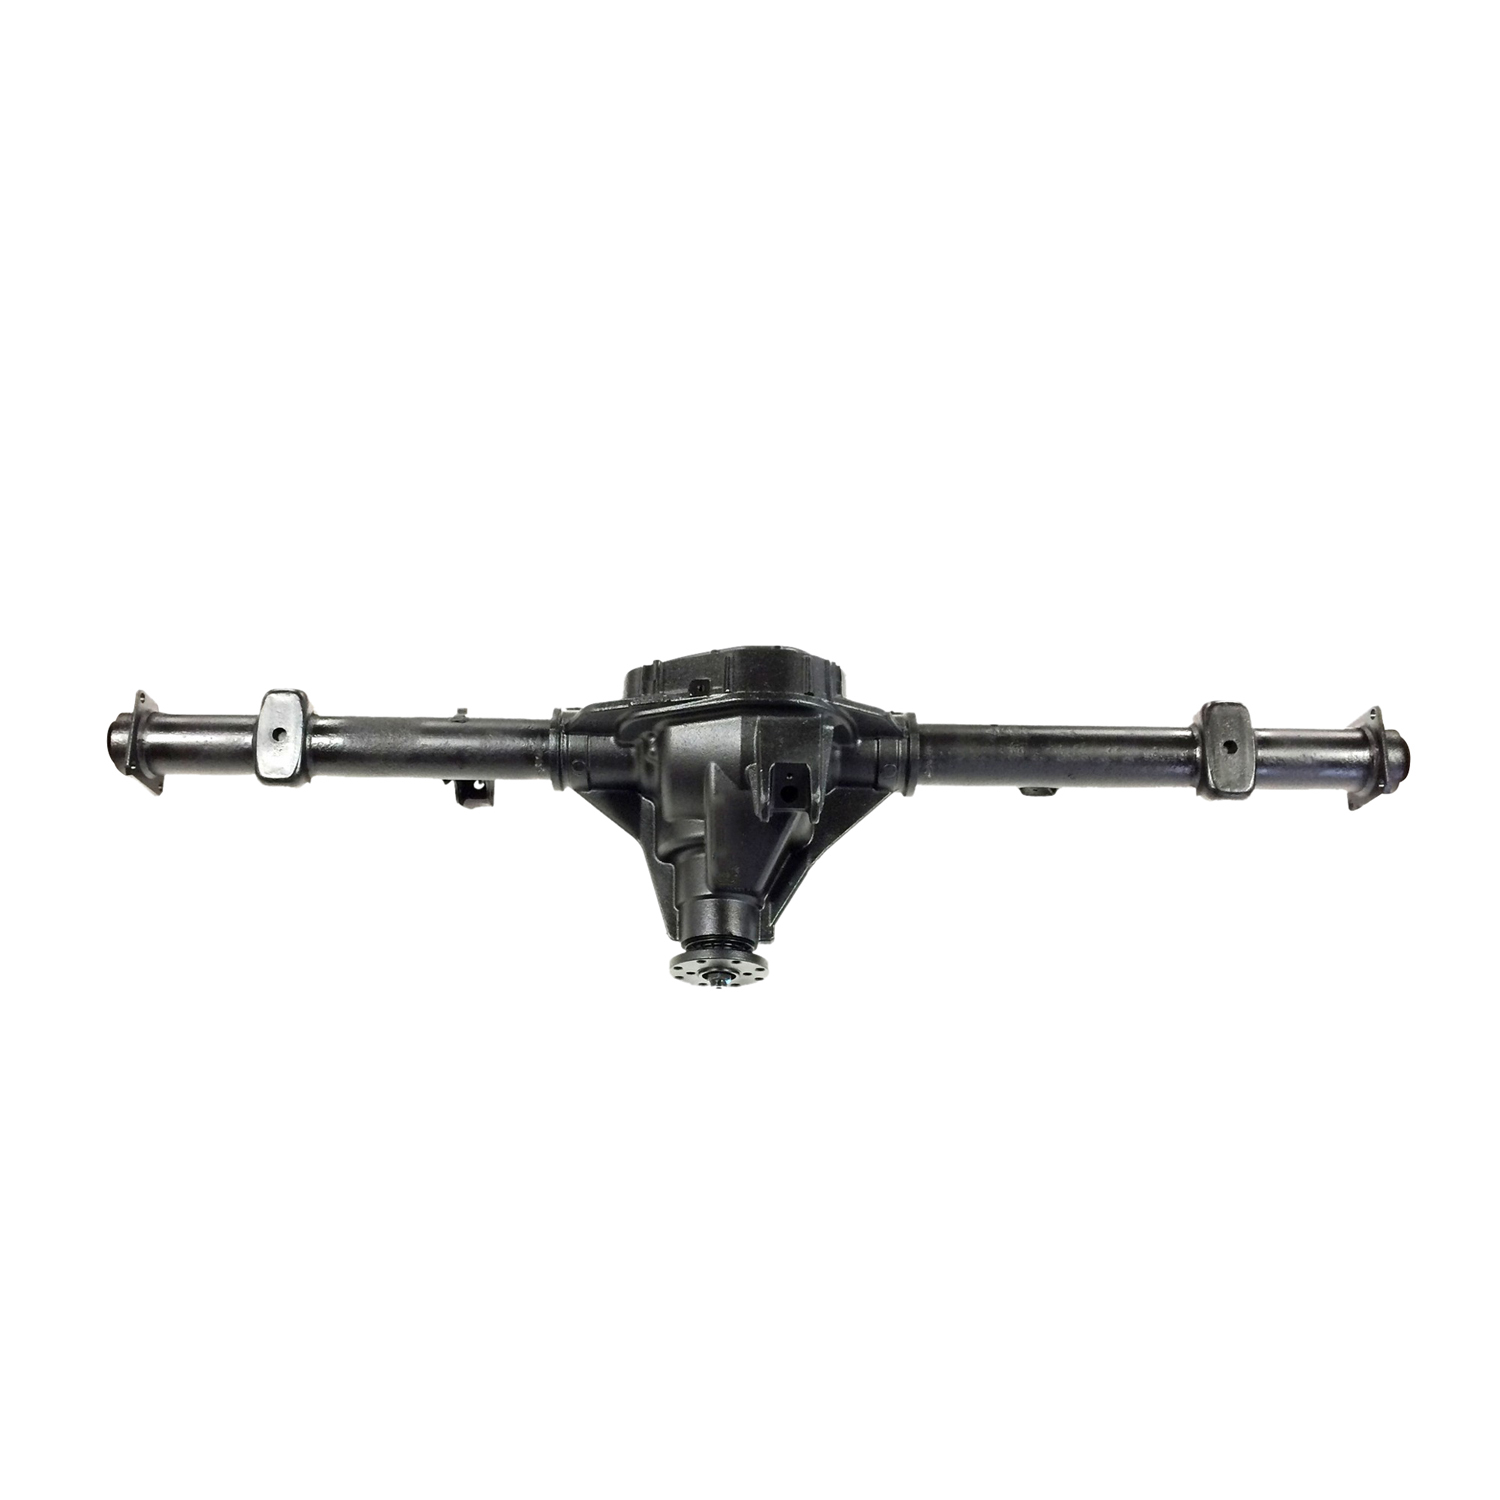 Remanufactured Axle Assy for 9.75" 99-00 F150 3.31, Rear Drum, Posi LSD *Check Tag*